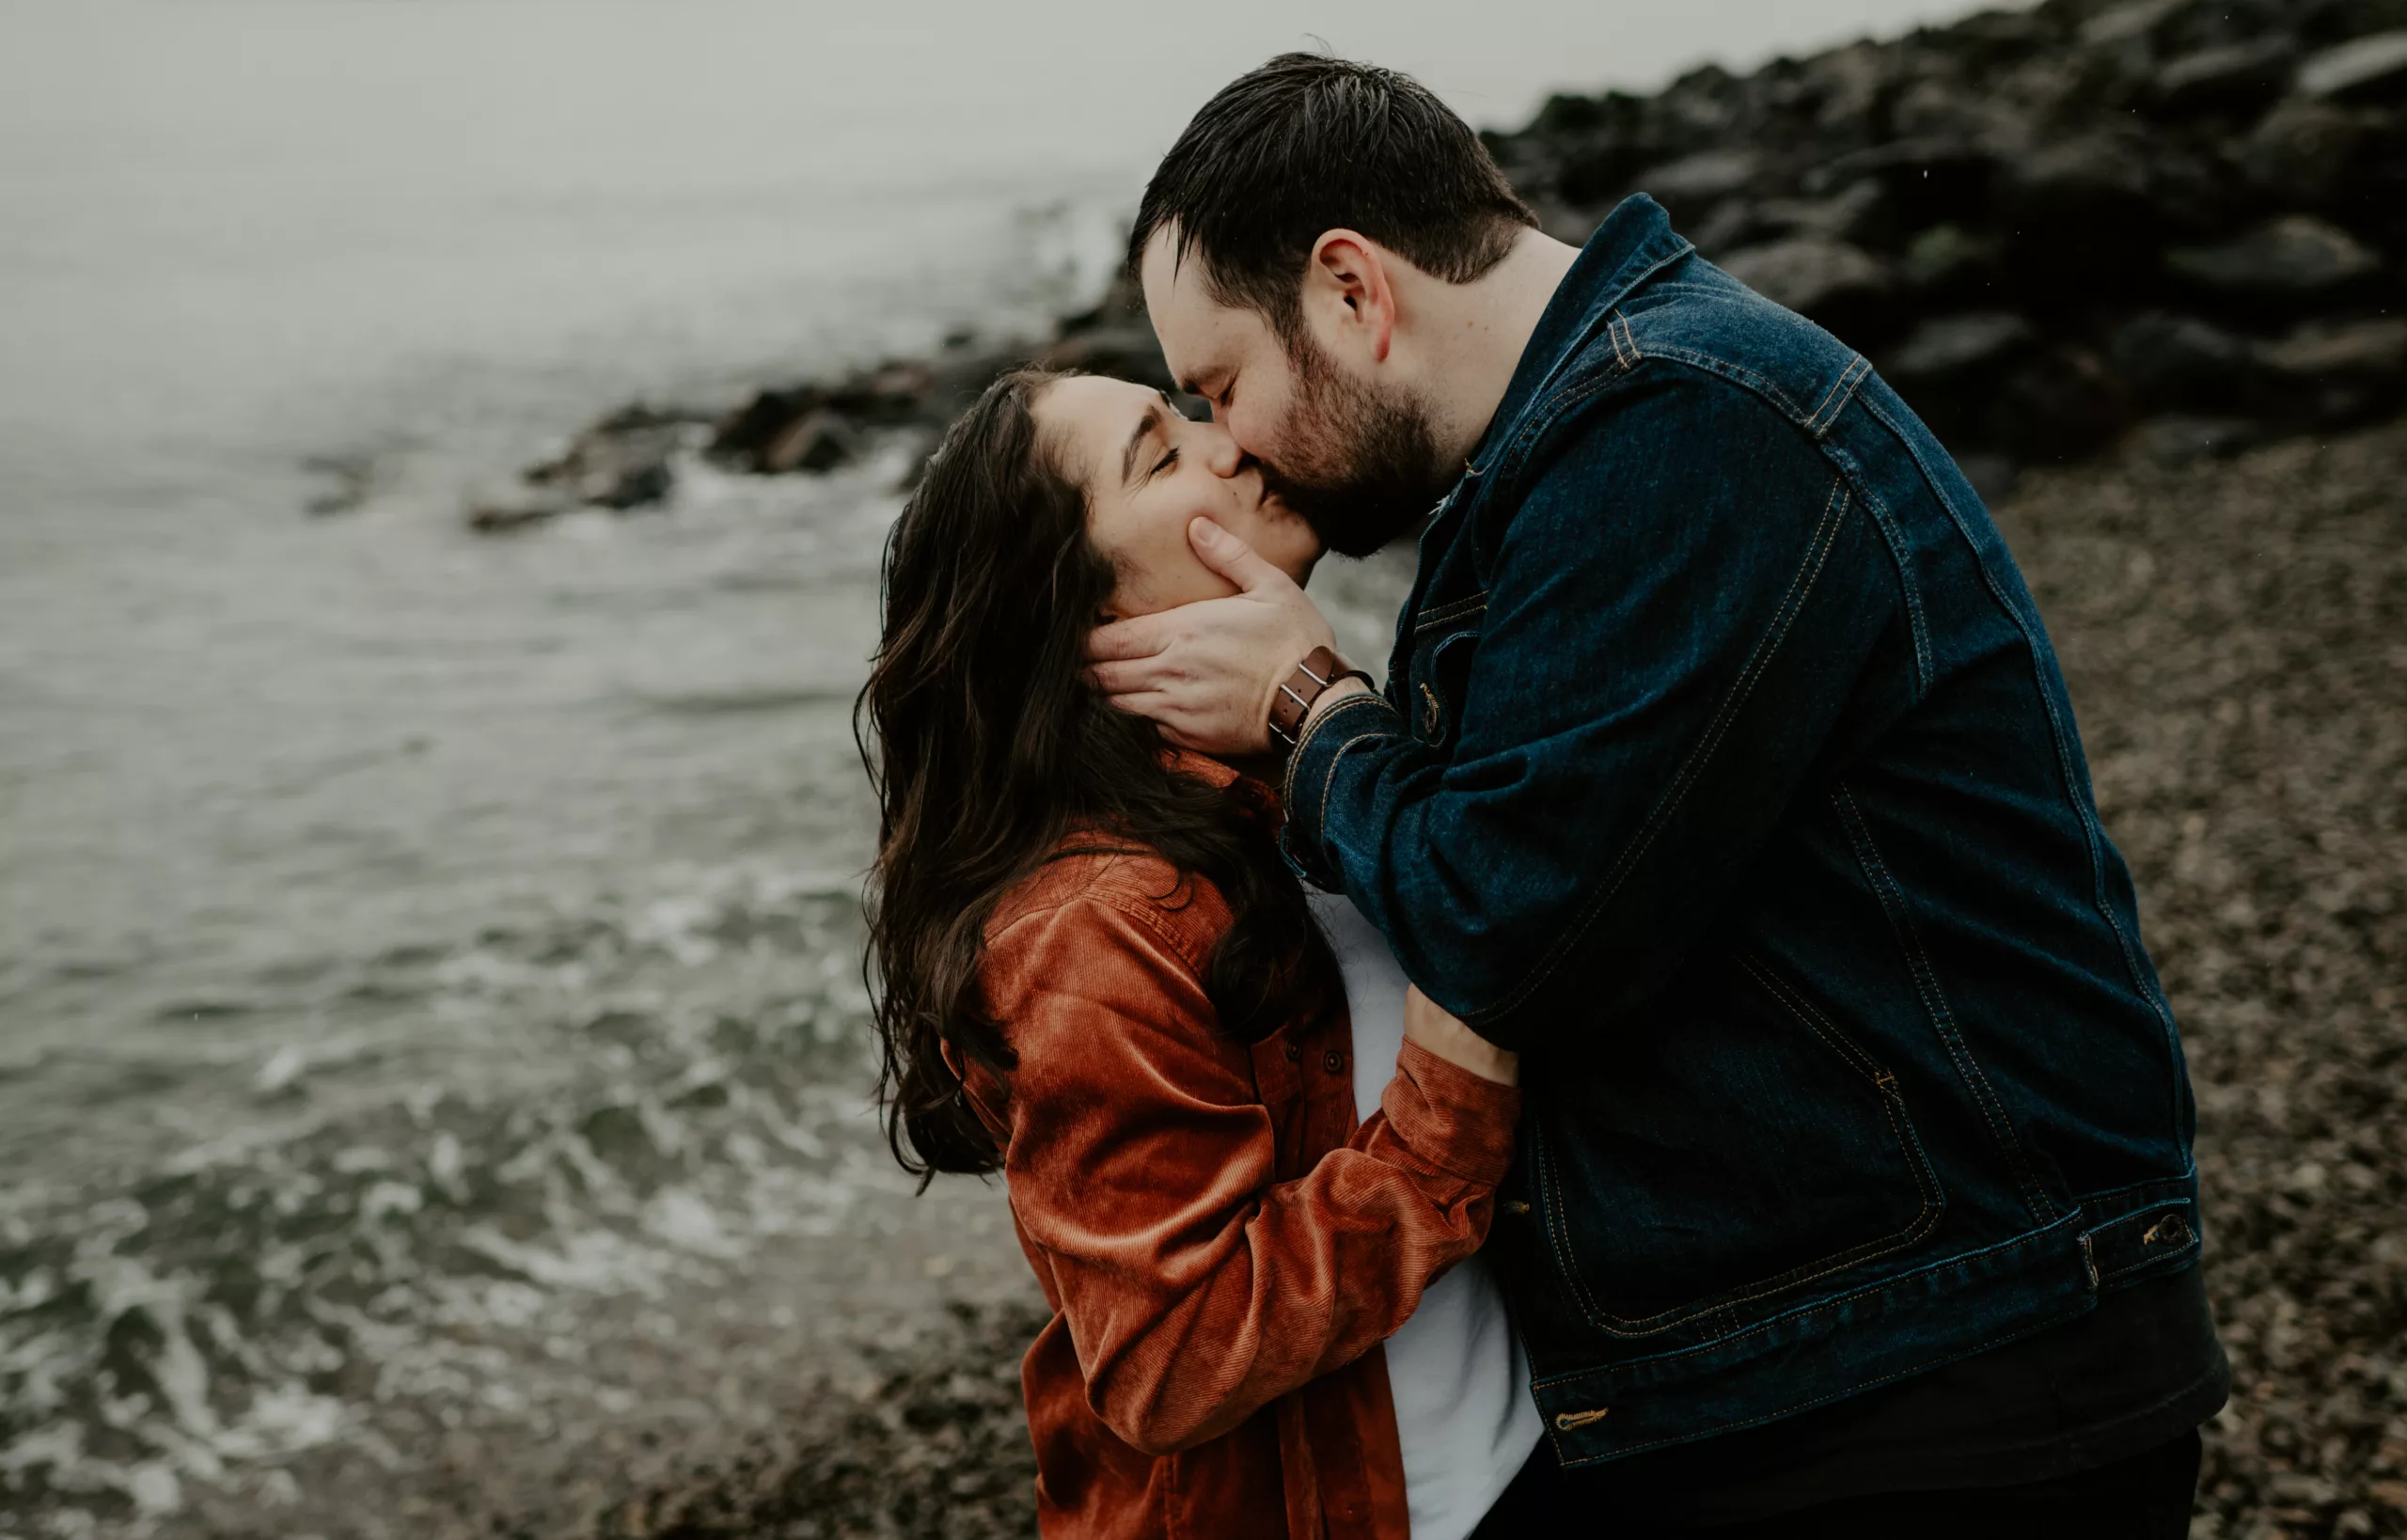 couple kisses on the beach during a rainy day